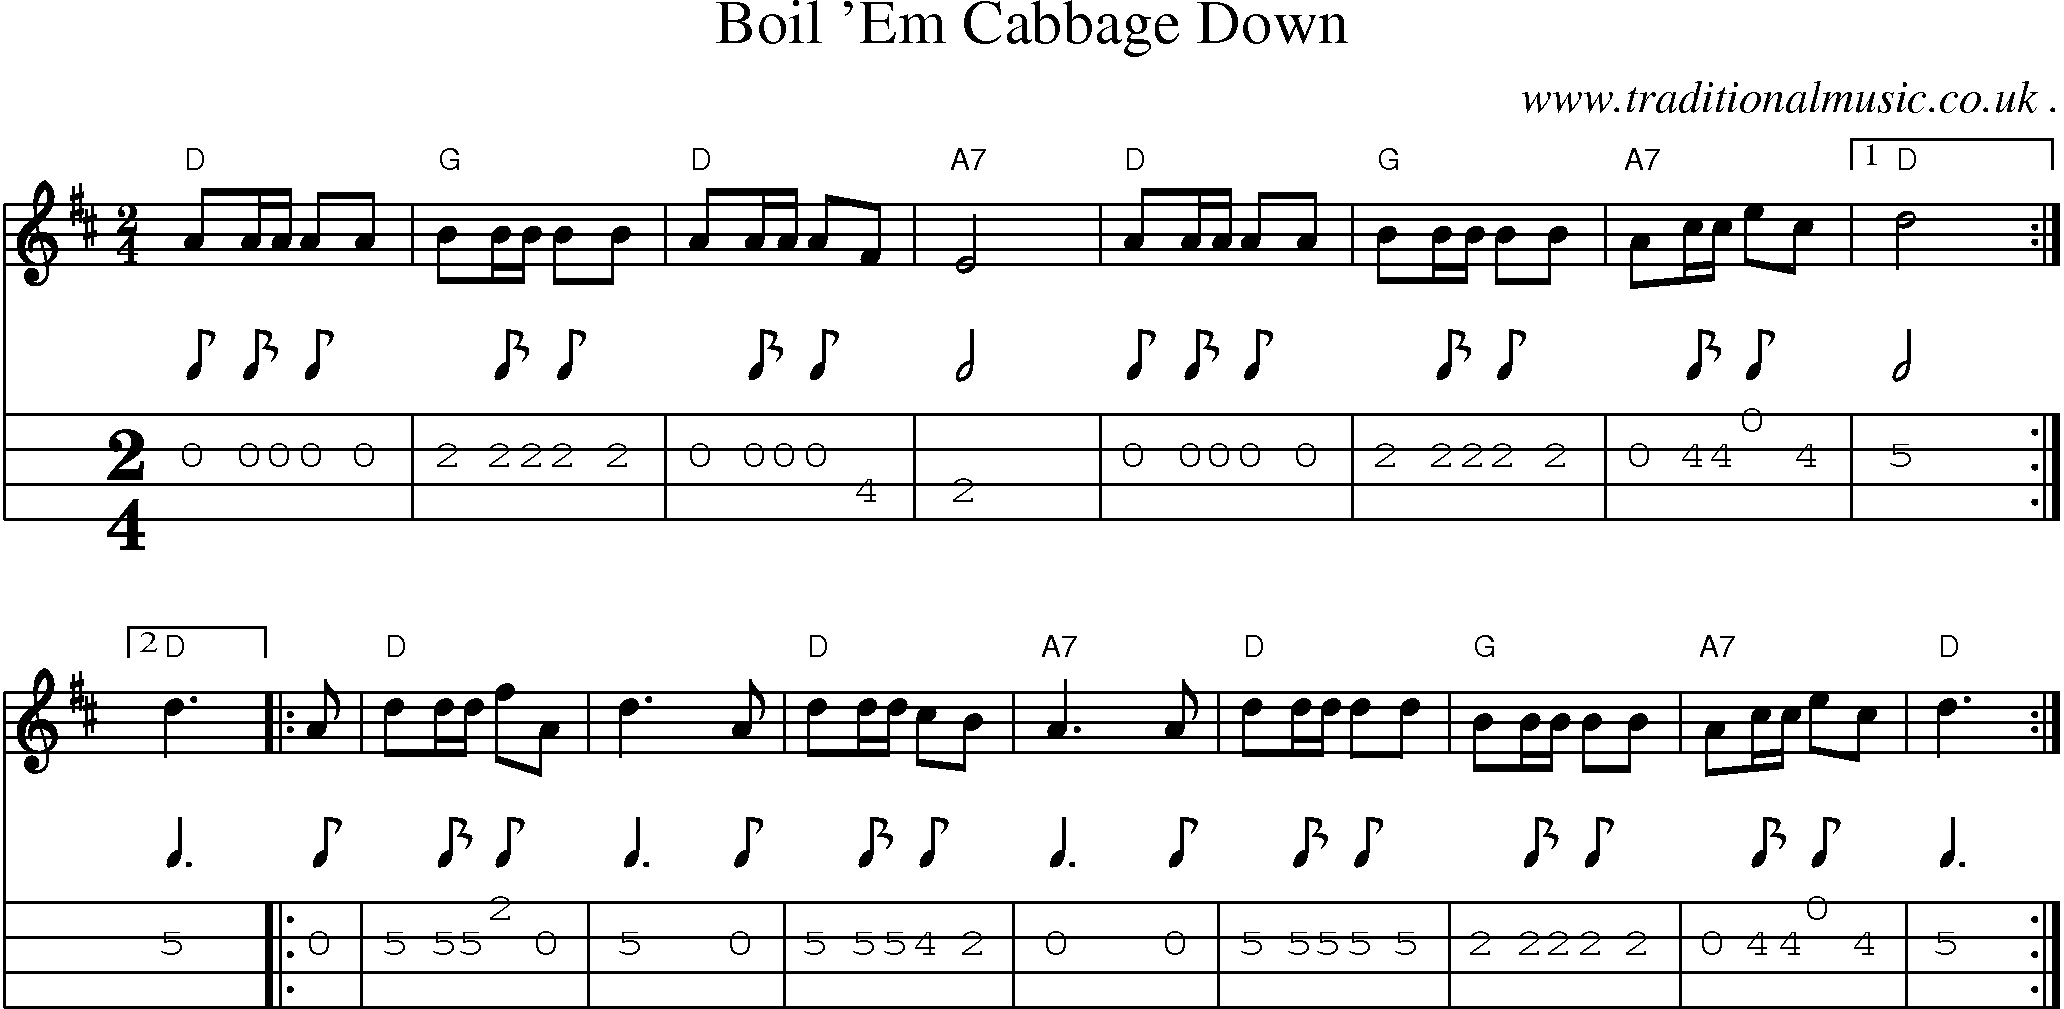 Music Score and Mandolin Tabs for Boil em Cabbage Down